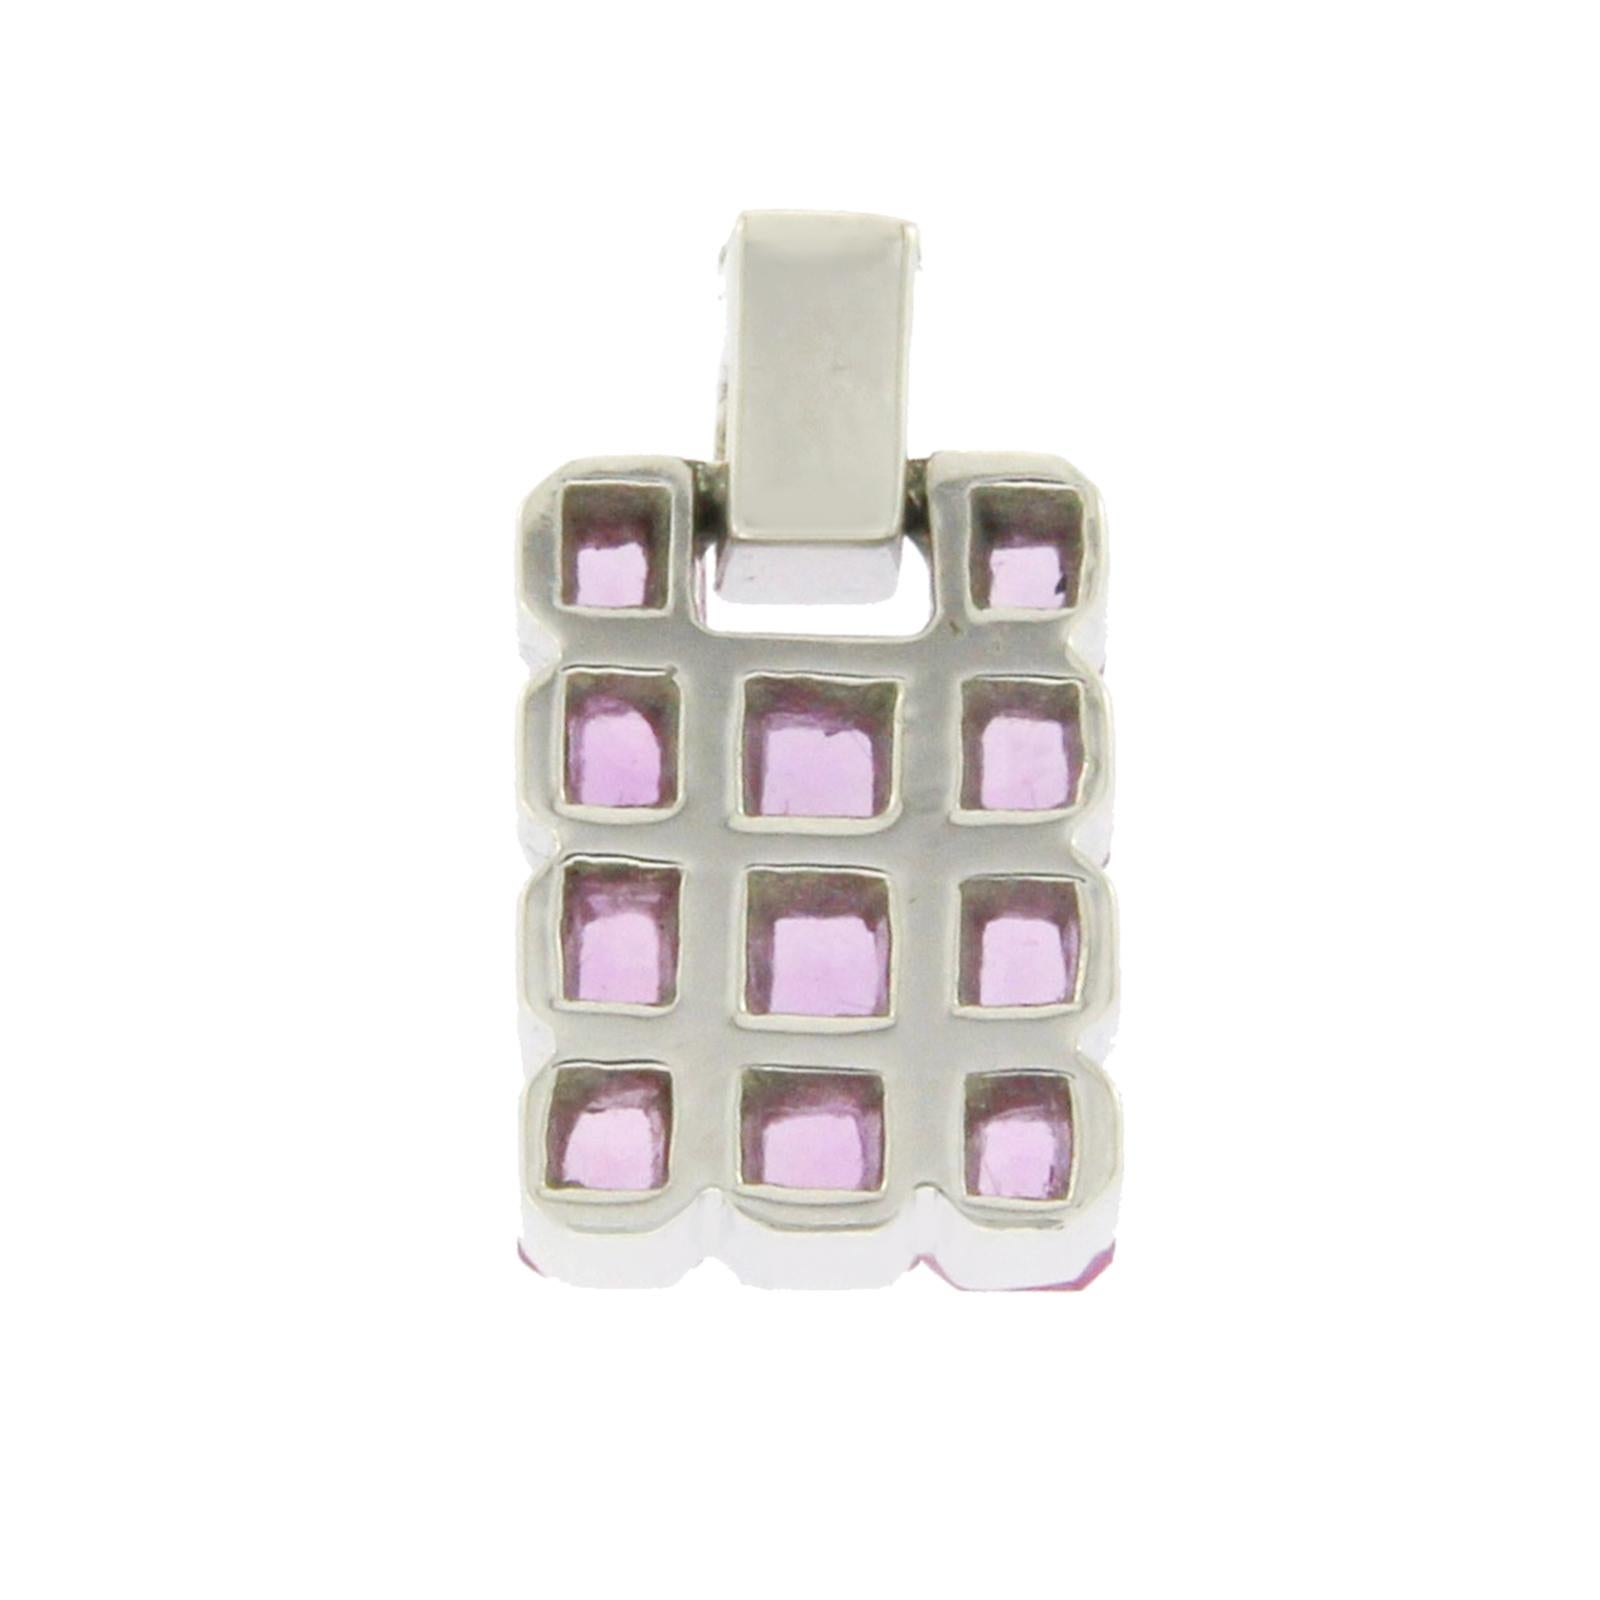 Type: Pendant
Height: 14.5 mm
Width:9 mm
Metal: White Gold
Metal Purity: 18K
Stone Type:0.25 CT G VS2 Diamonds 3.95 CT Natural Pink Sapphire
Hallmark:750
Total Weight: 4.1 Grams
Condition: New
Stock Number: BL116